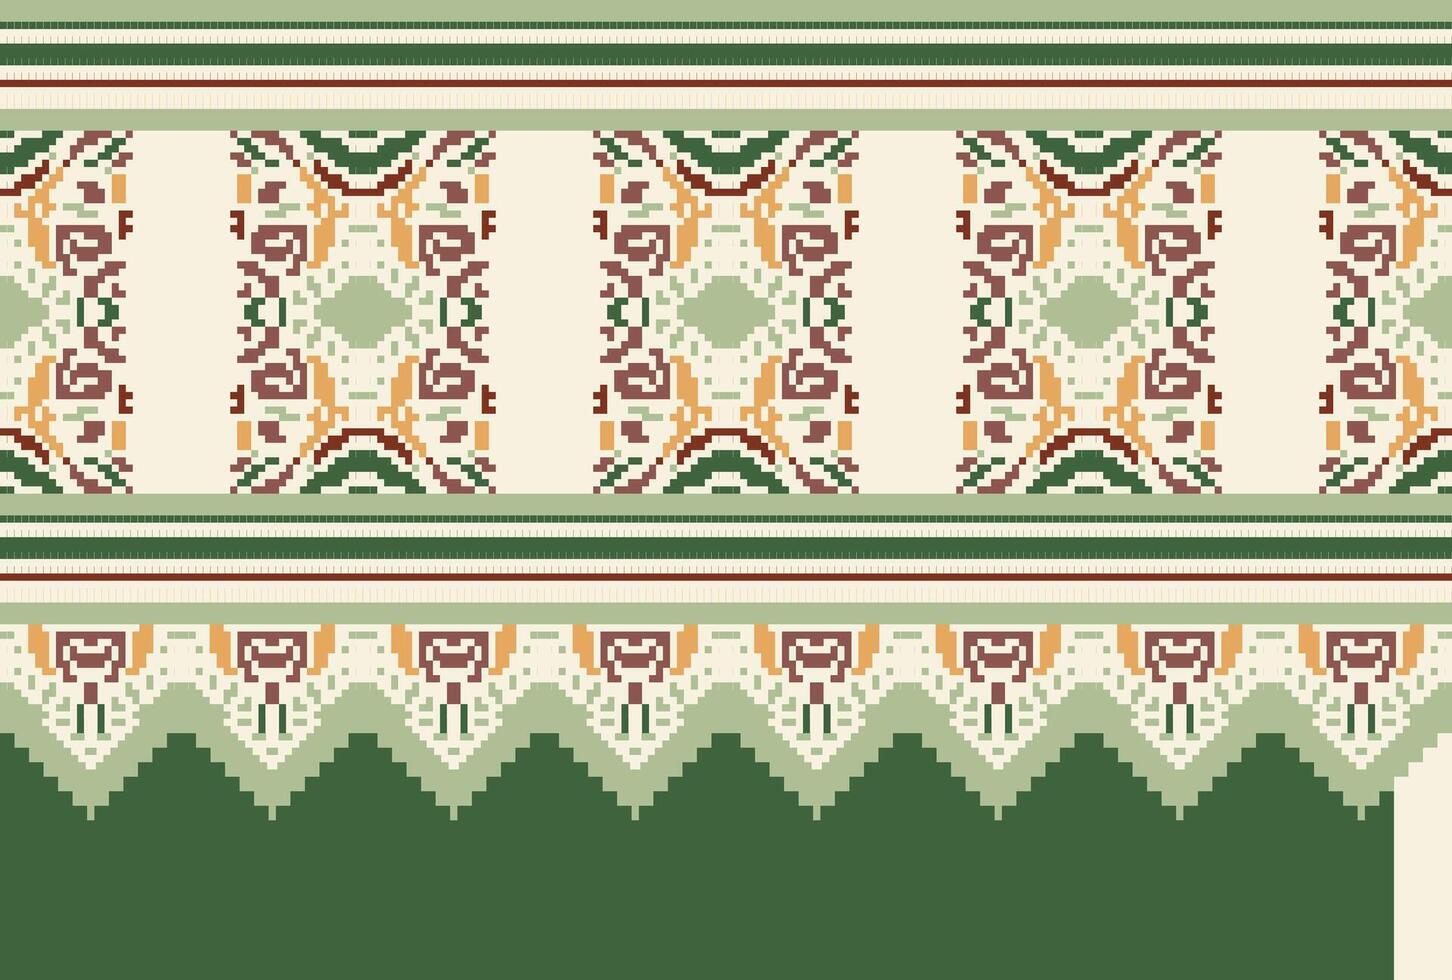 cross stitch Embroidery ethnic pattern, Vector Geometric ornate background, Cross stitch retro zigzag style, Blue and yellow pattern knitting continuous, Design for textile, fabric, digital print